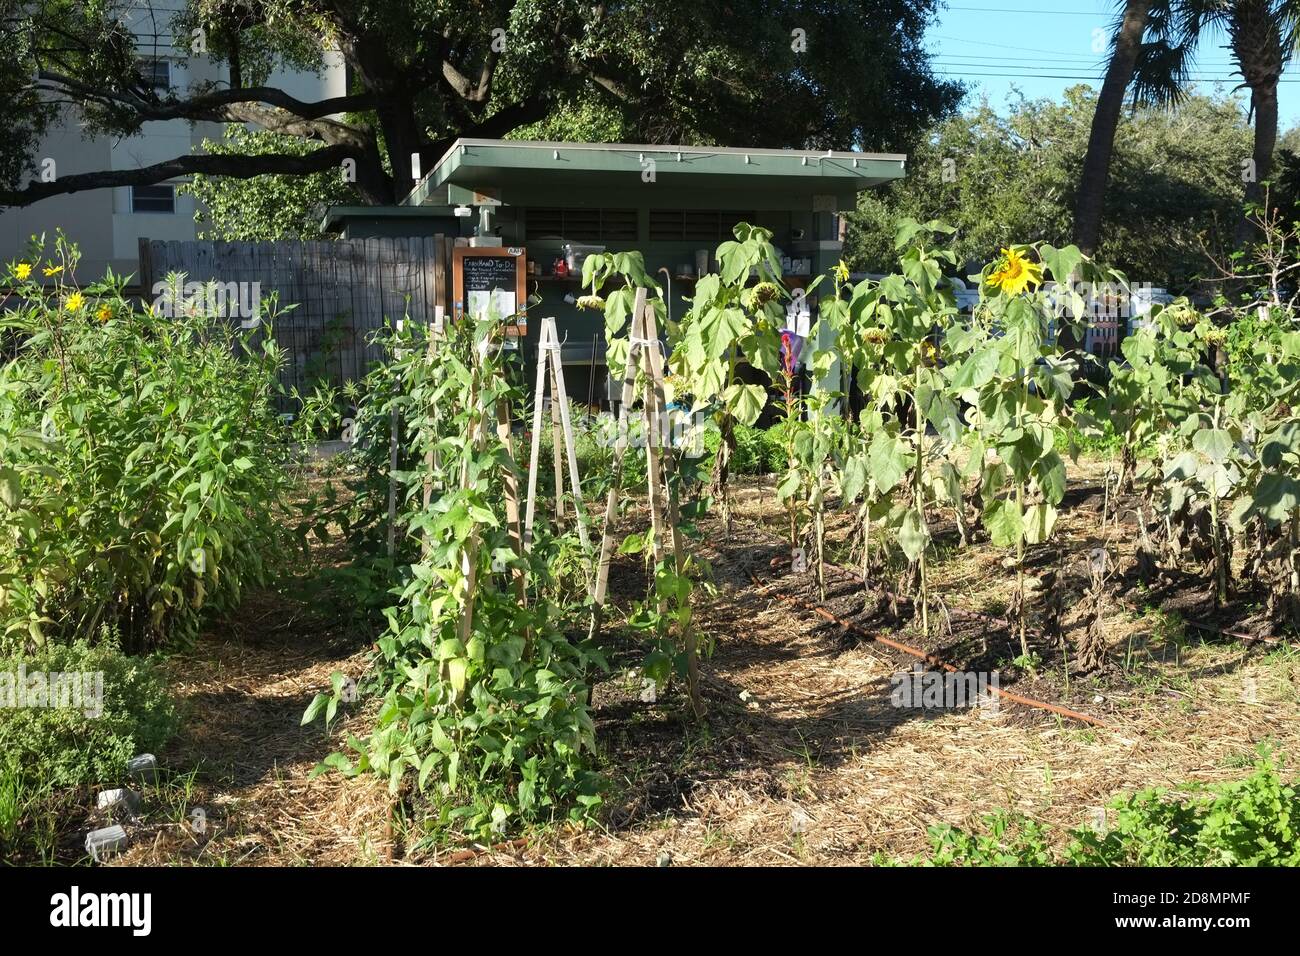 Urban Gardens with Crops of Vegetables, an Urban Farm, Oven and Chairs, Tables, with Flowers, Kale, Peppers, Mint, Sunflowers, Copper Piping of Water. Stock Photo